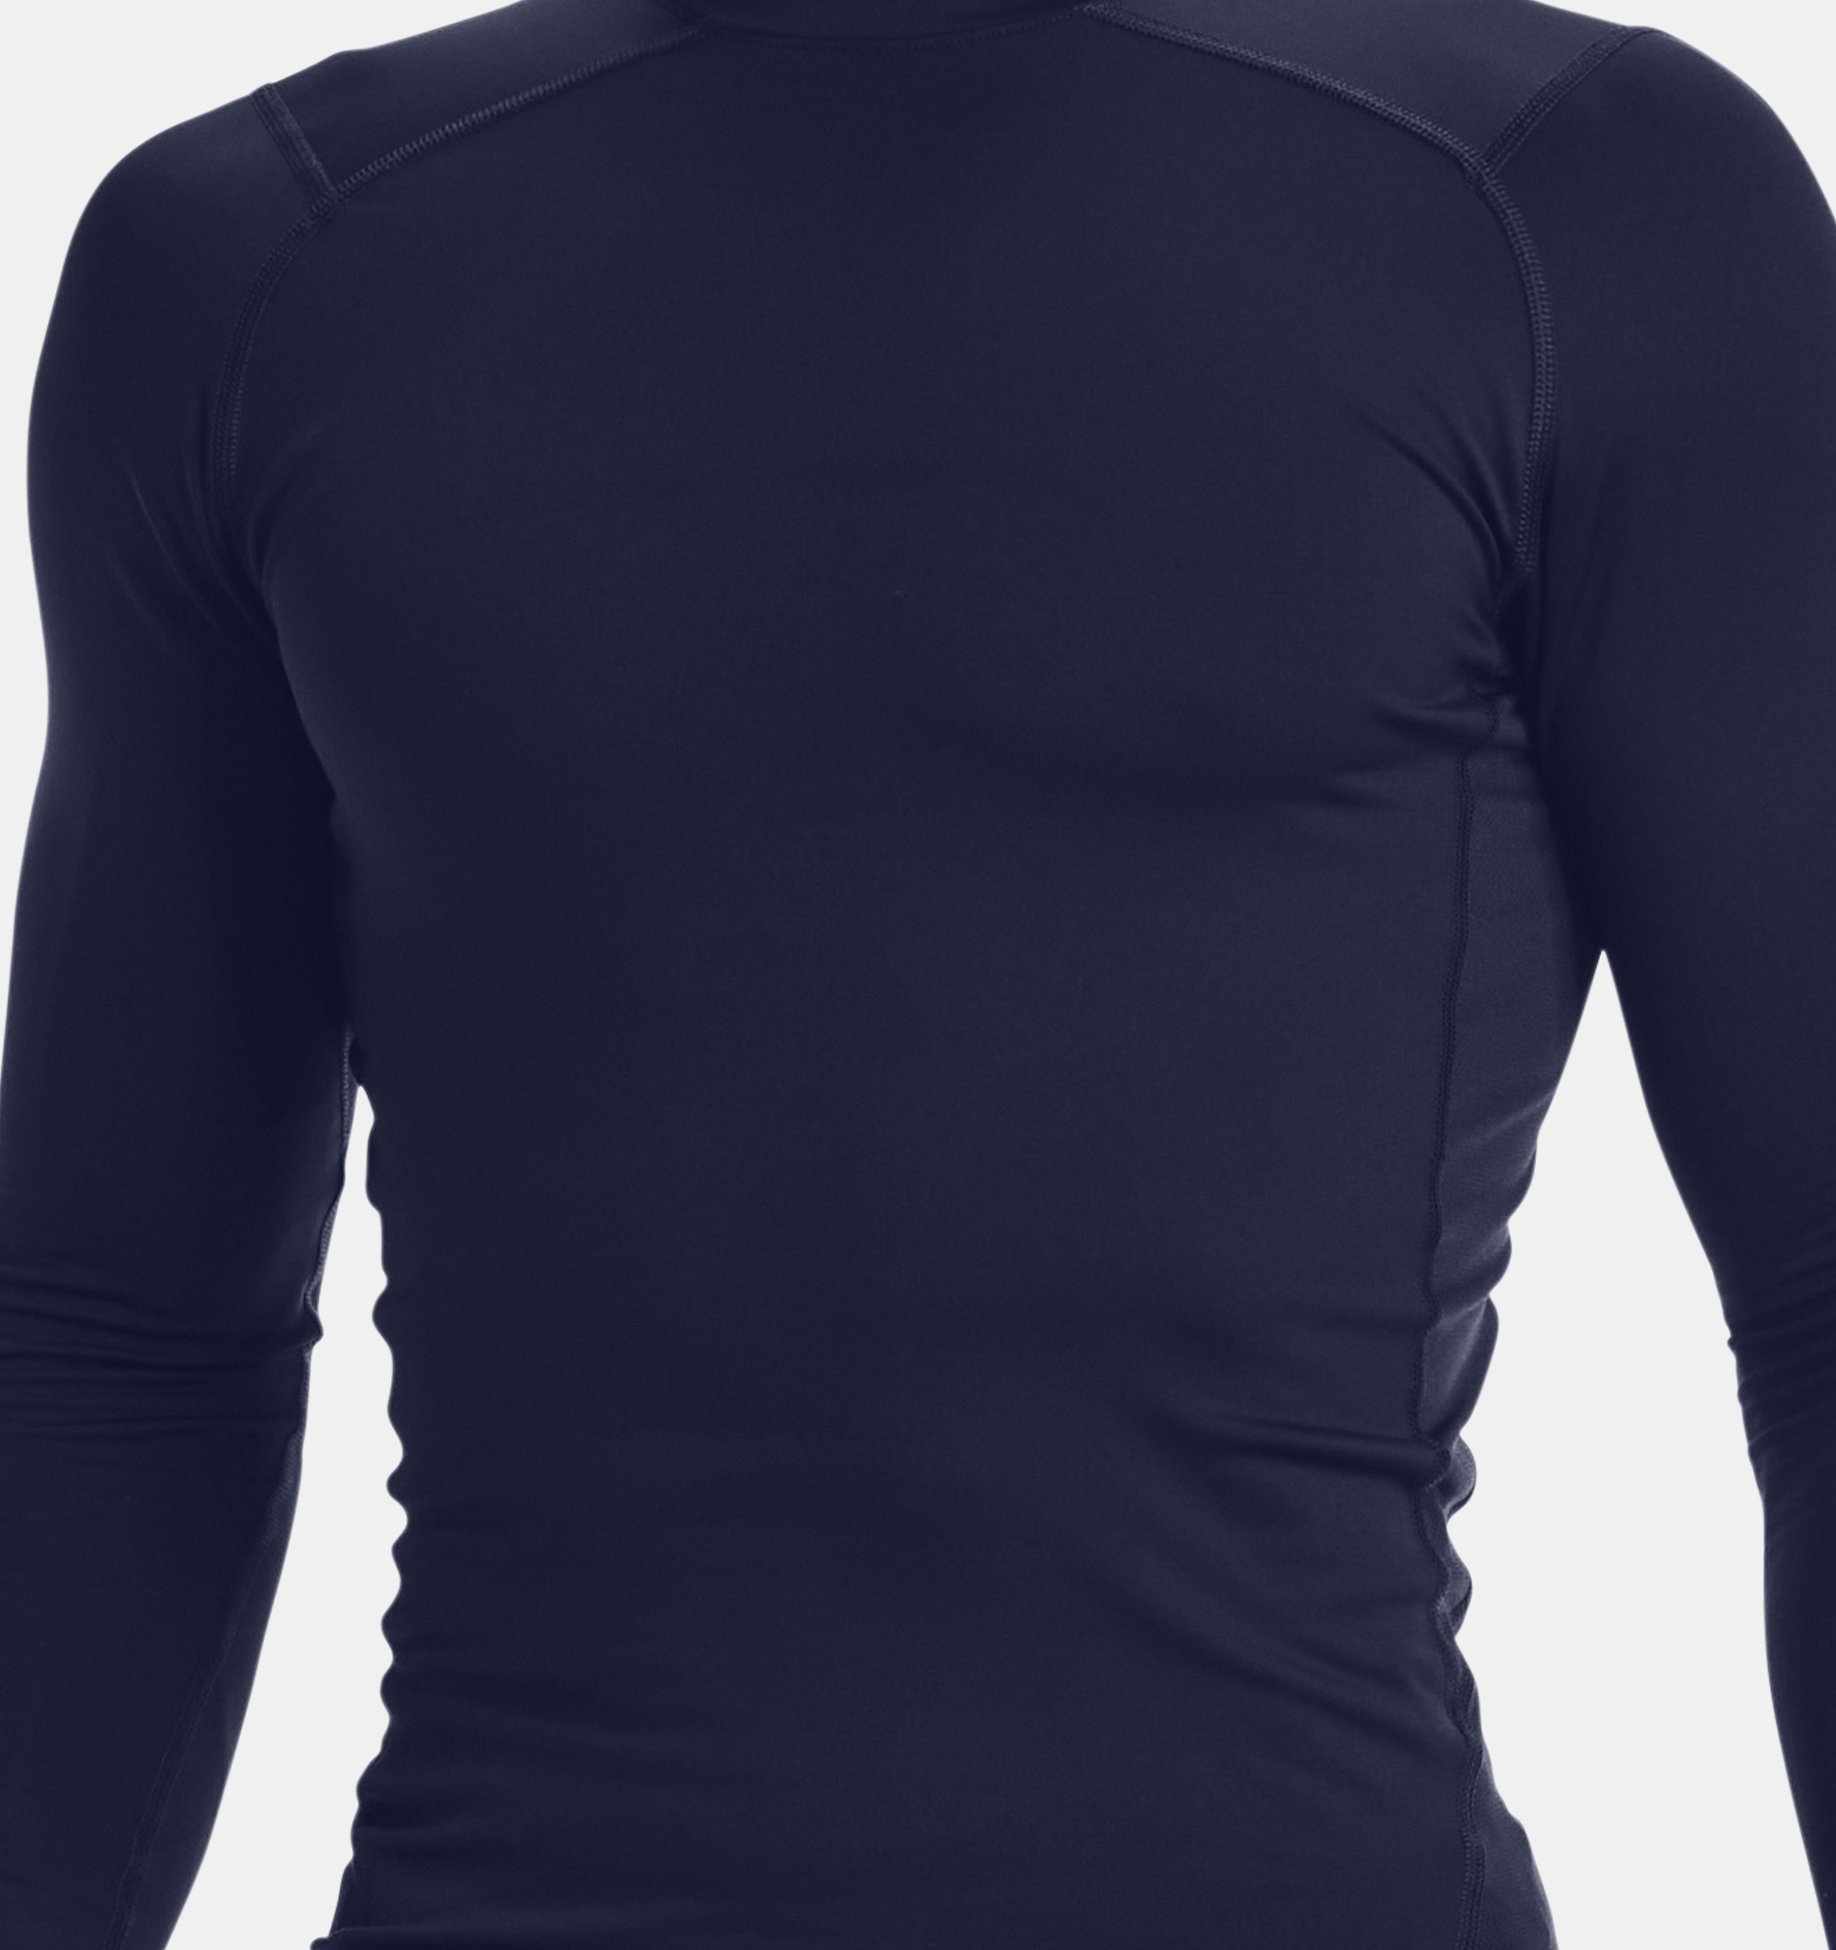 Buy Under Armour ColdGear Armour Compression Mock (1366072) from